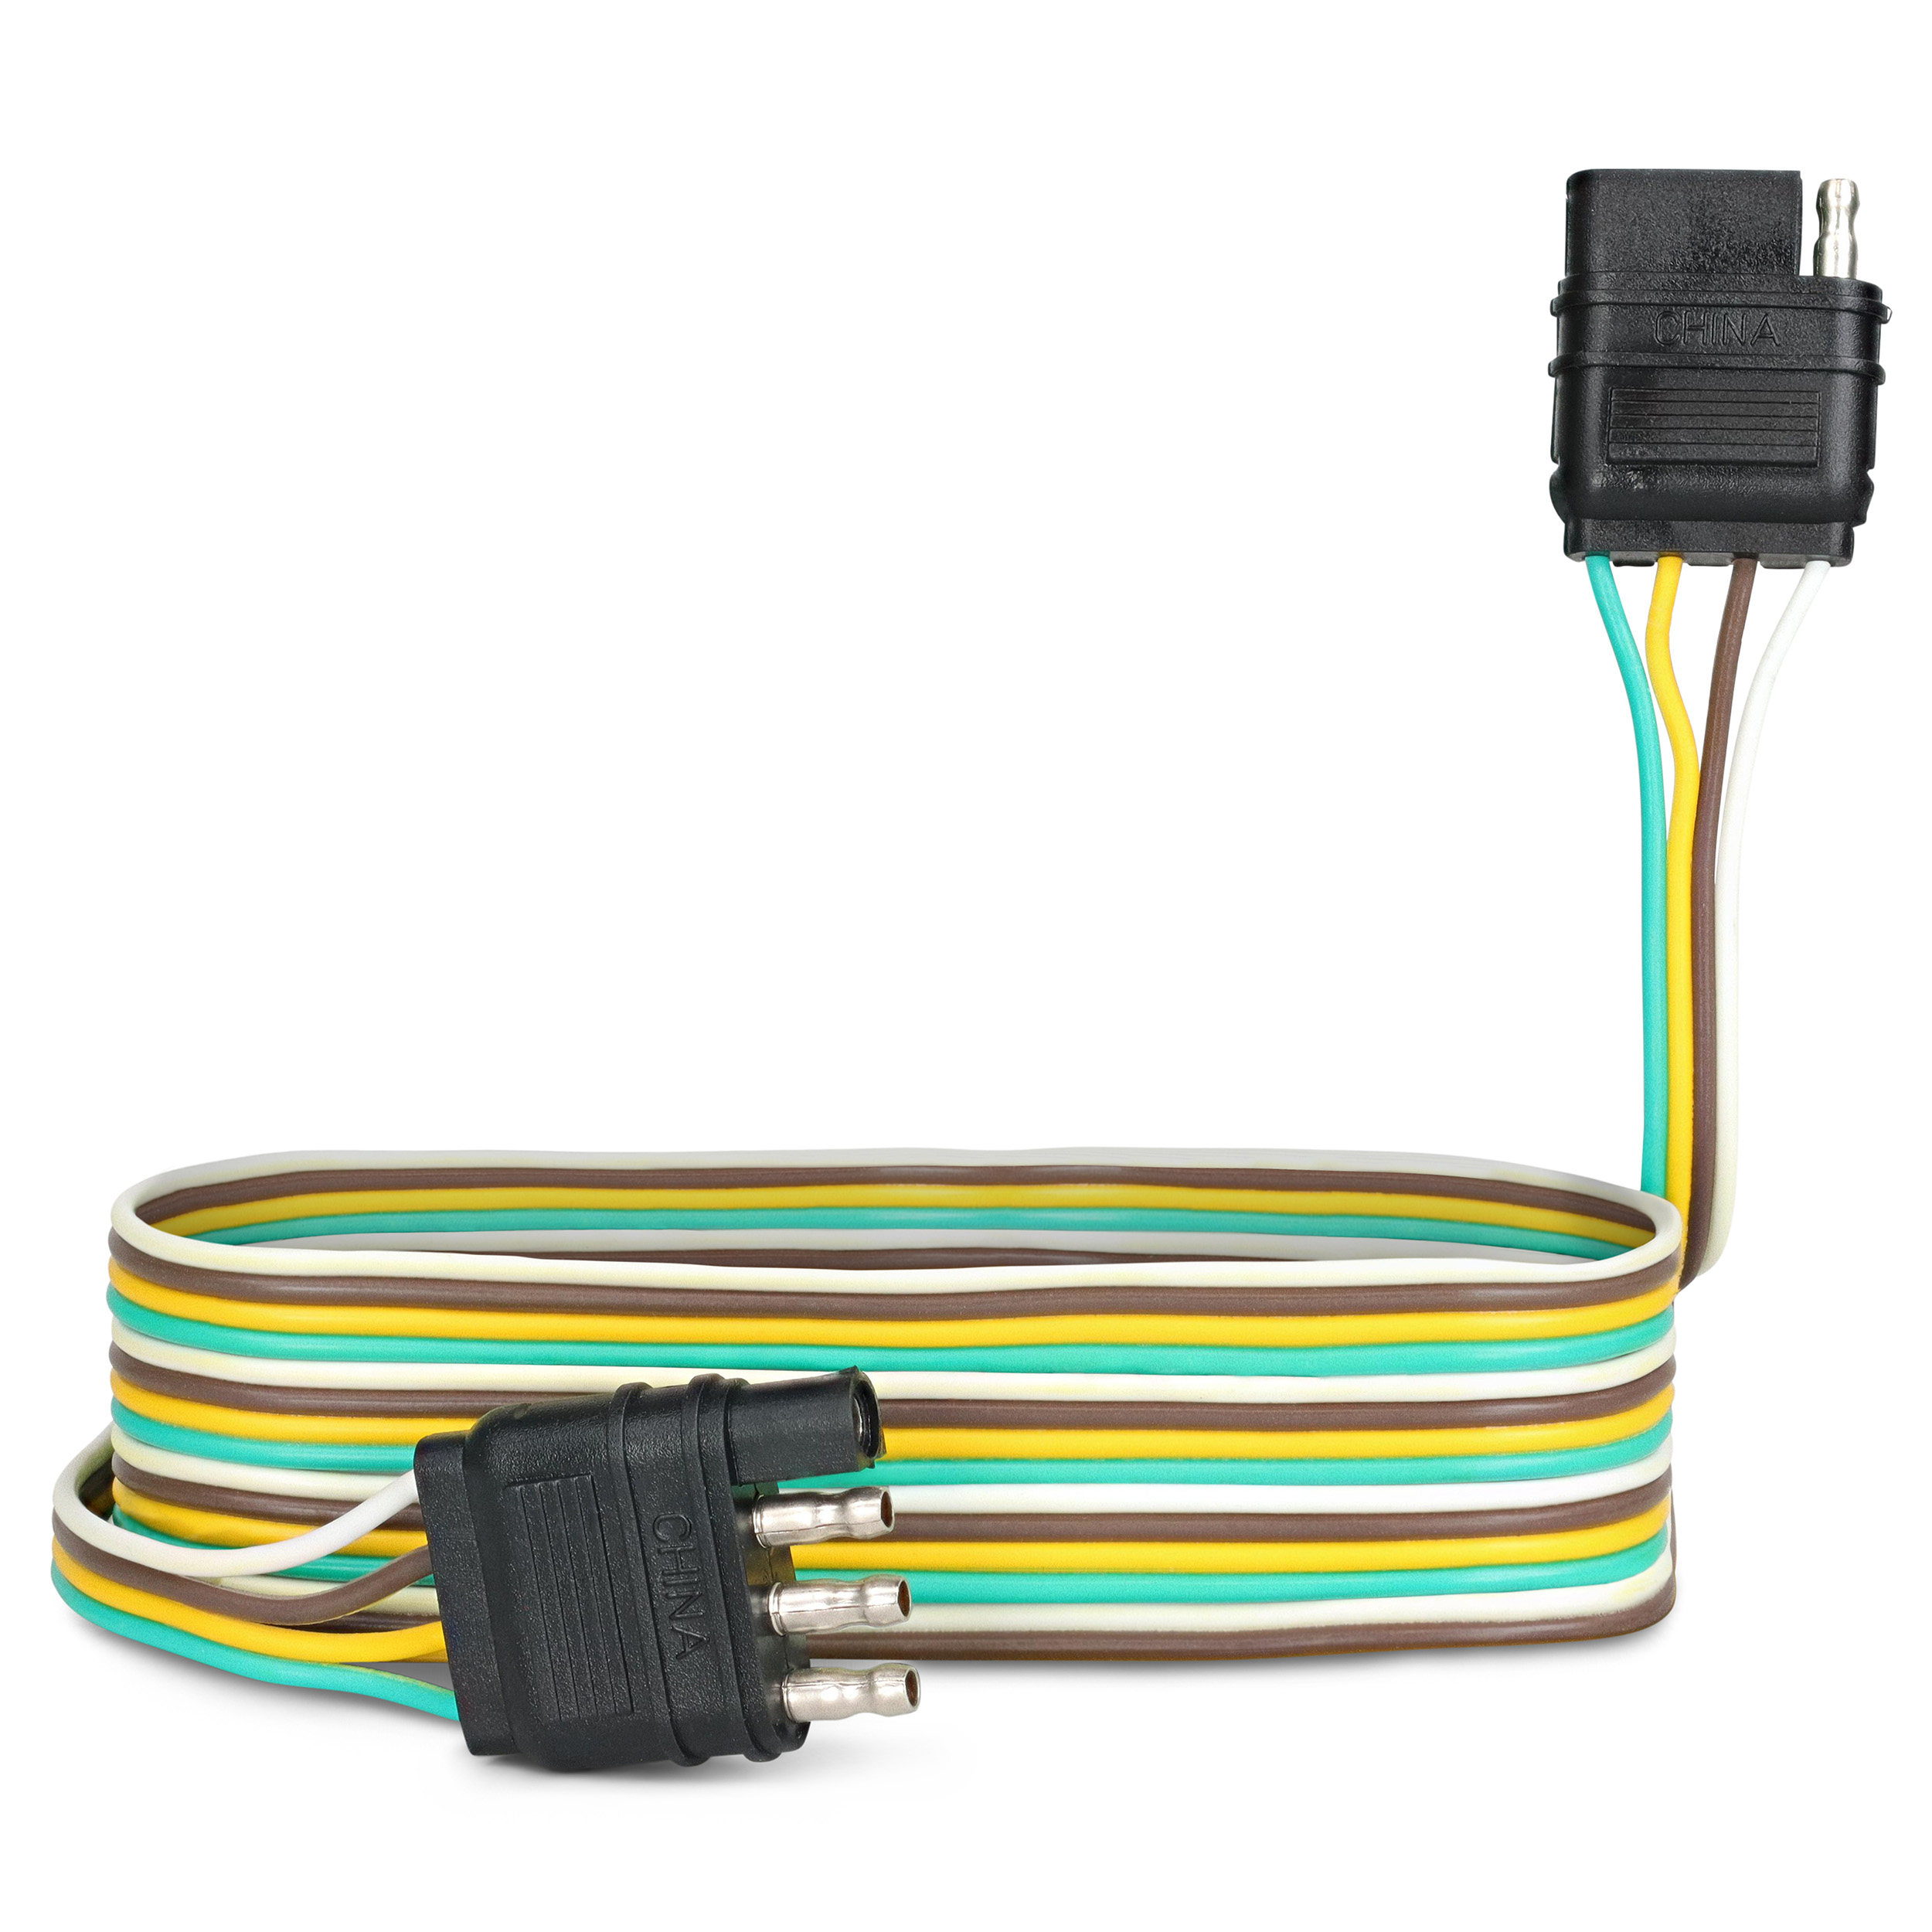 ABN 1909 - 4 Way 4 Pin Plug 20 Gauge Trailer Light Wiring Harness Extension 8ft - image 1 of 7